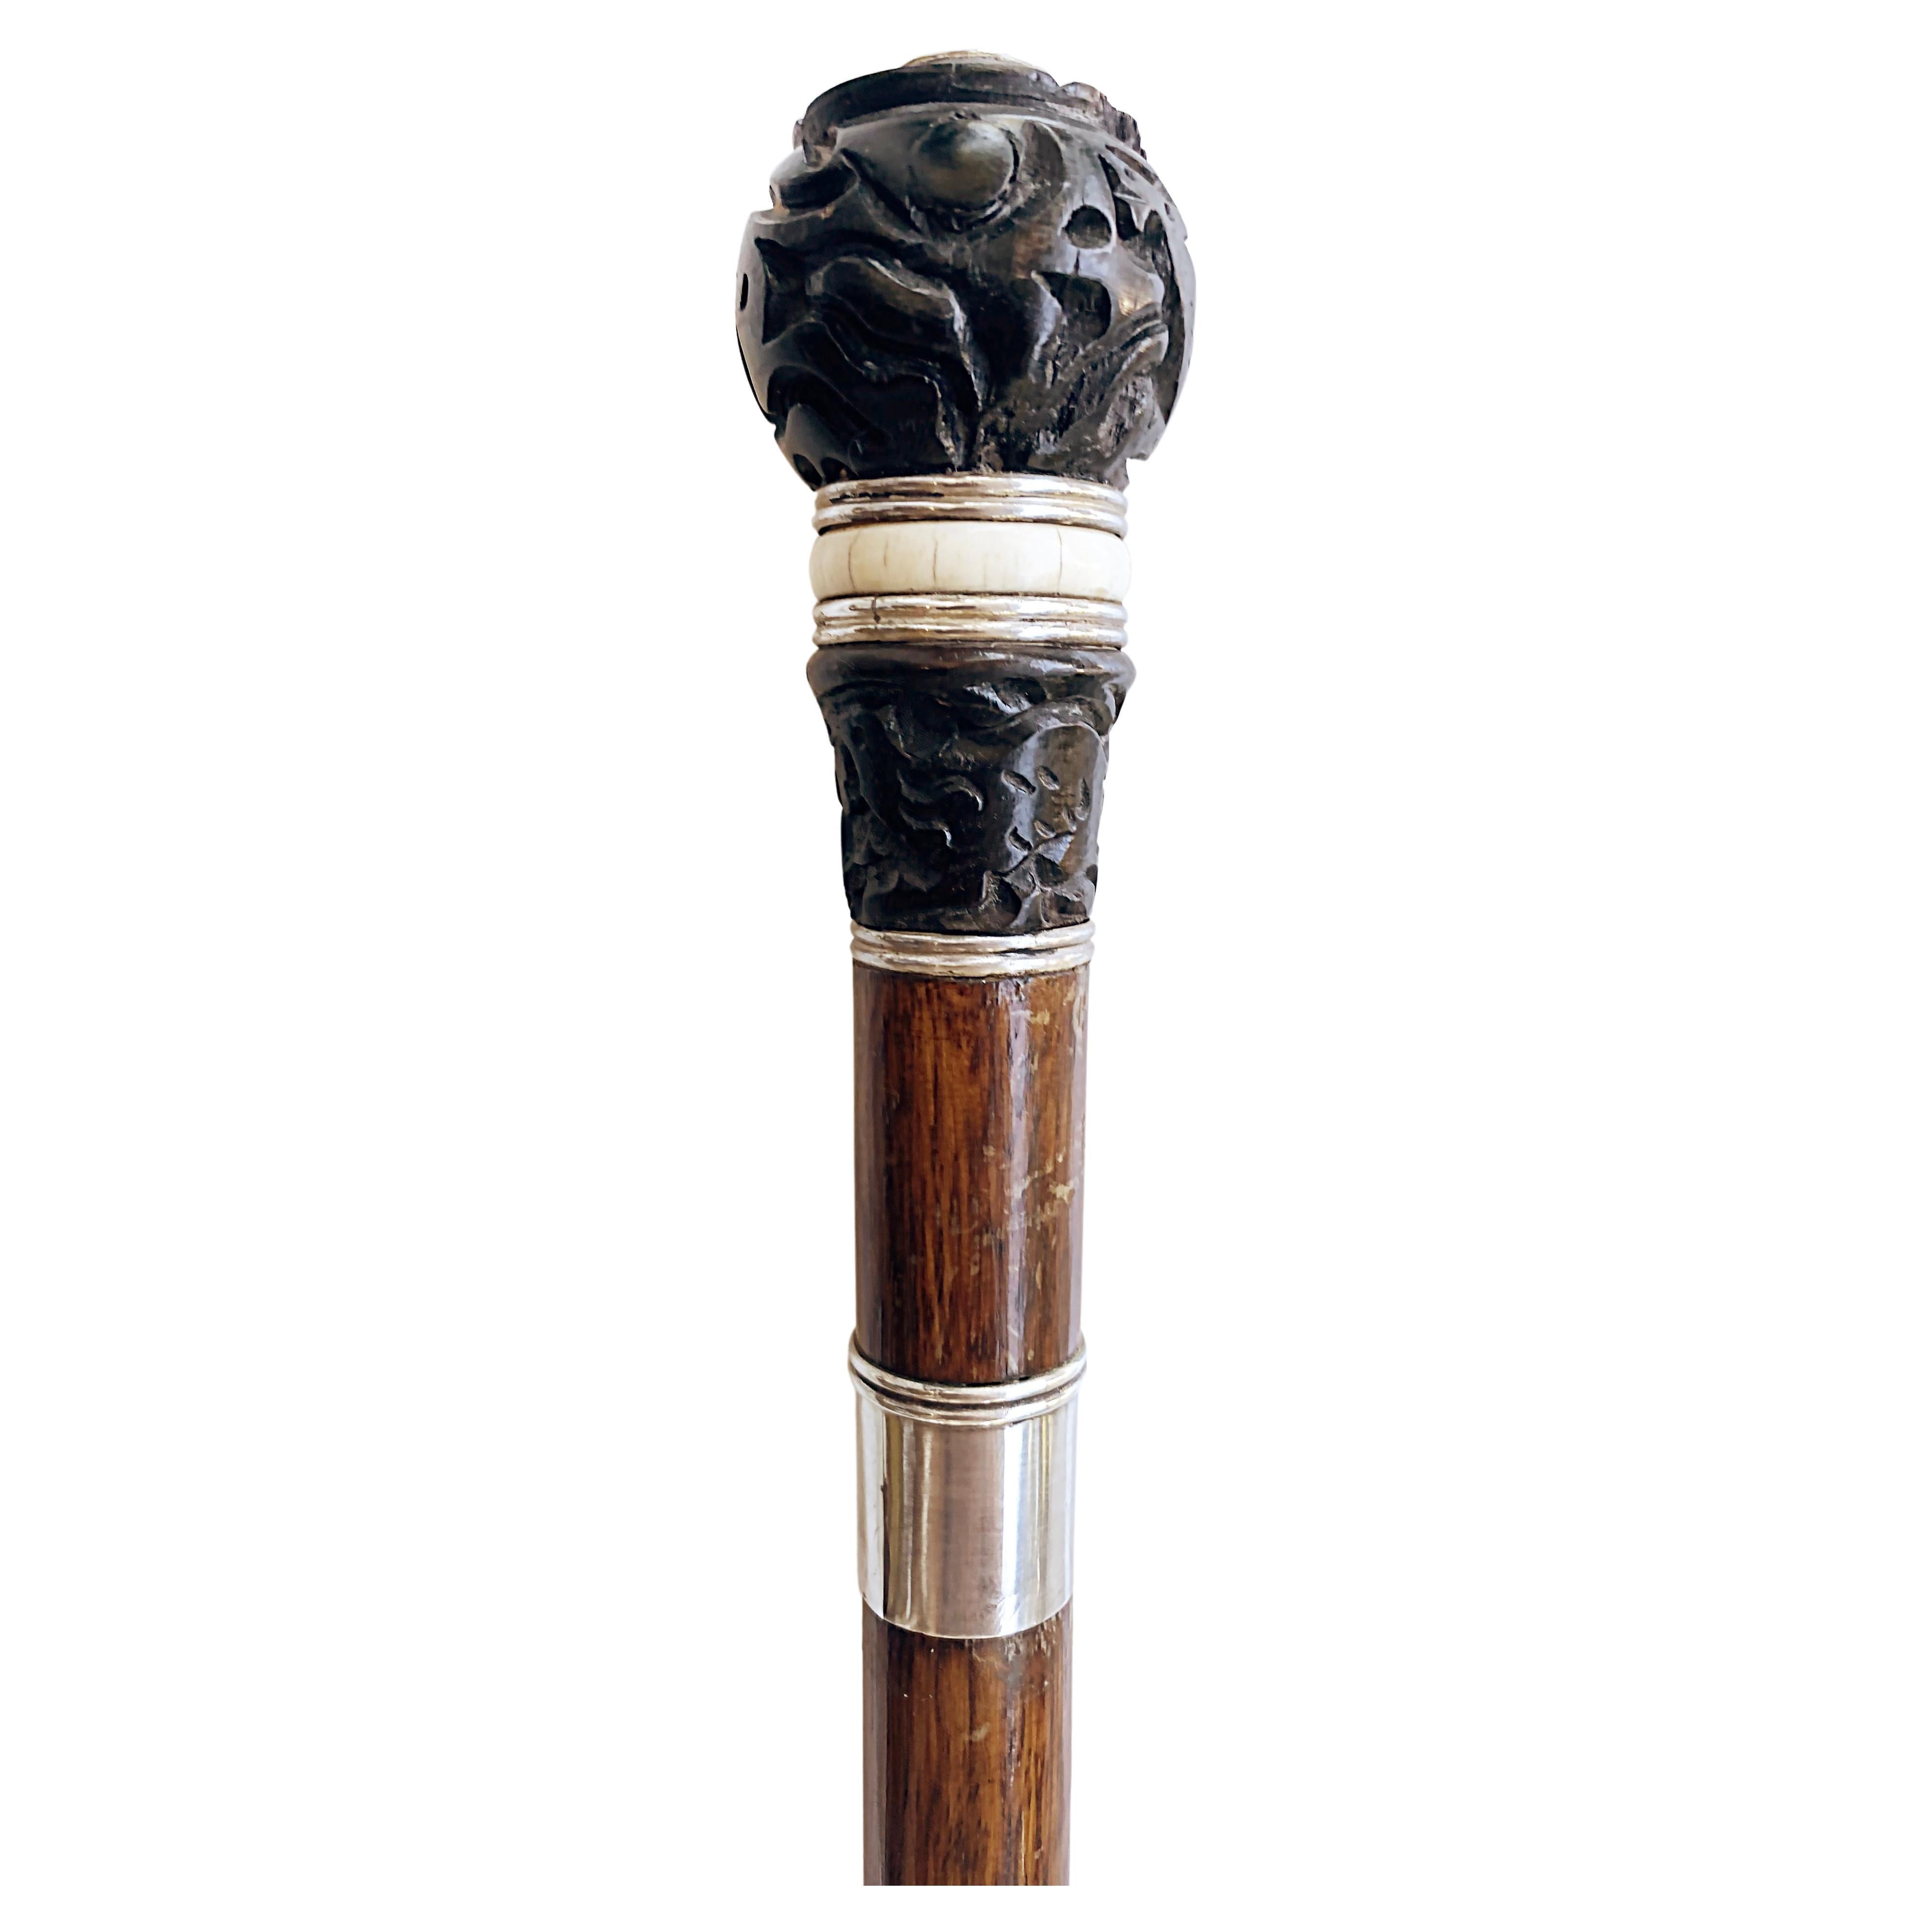 Rare Louis Vuitton Walking Stick with Carved Handle